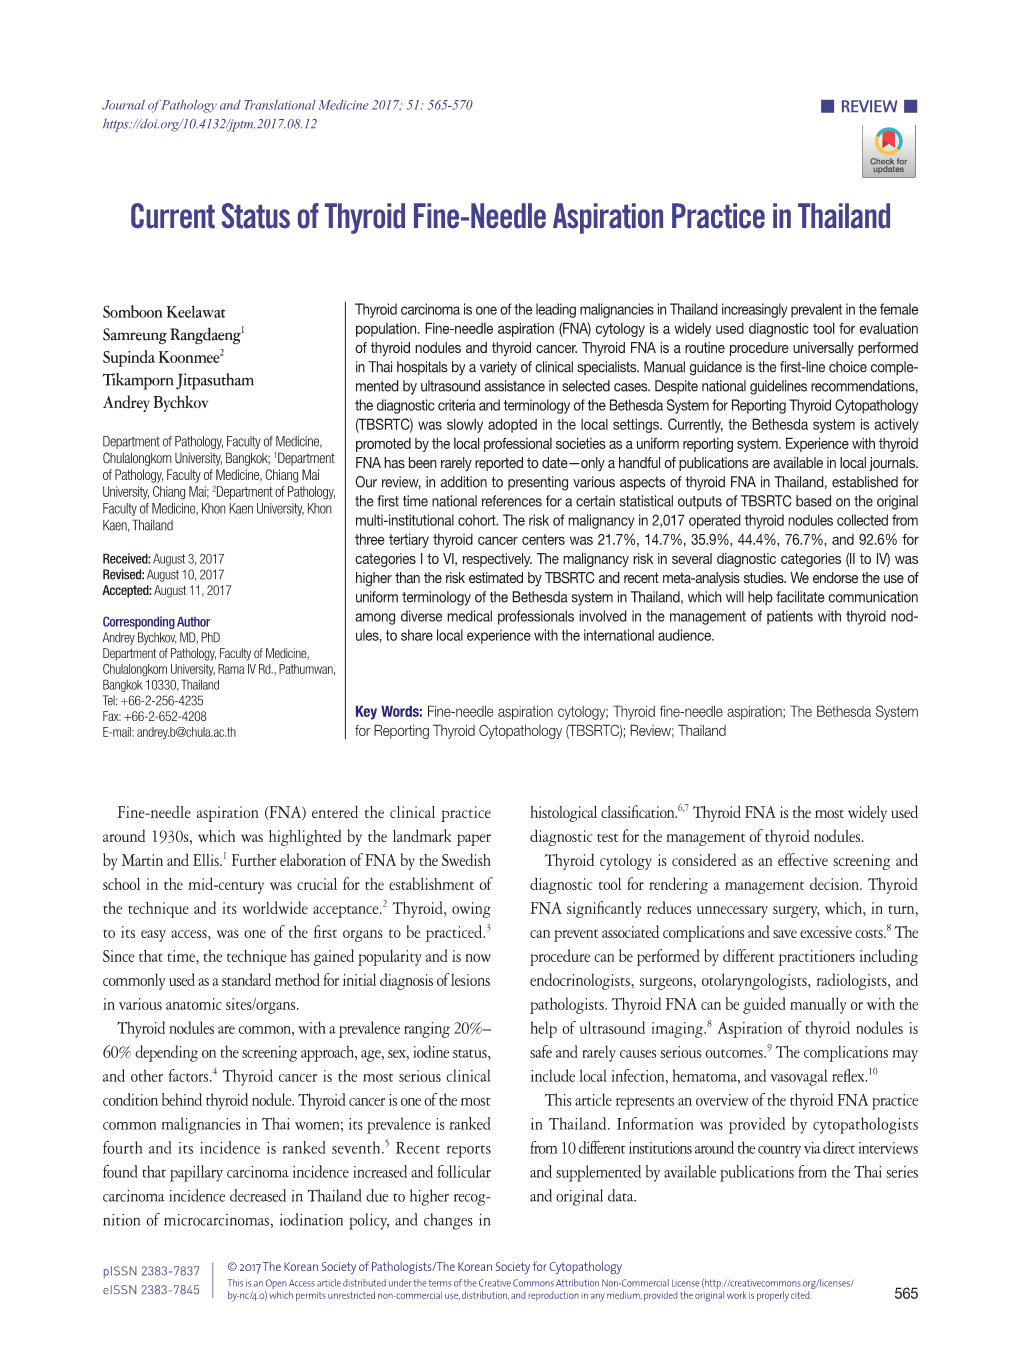 Current Status of Thyroid Fine-Needle Aspiration Practice in Thailand